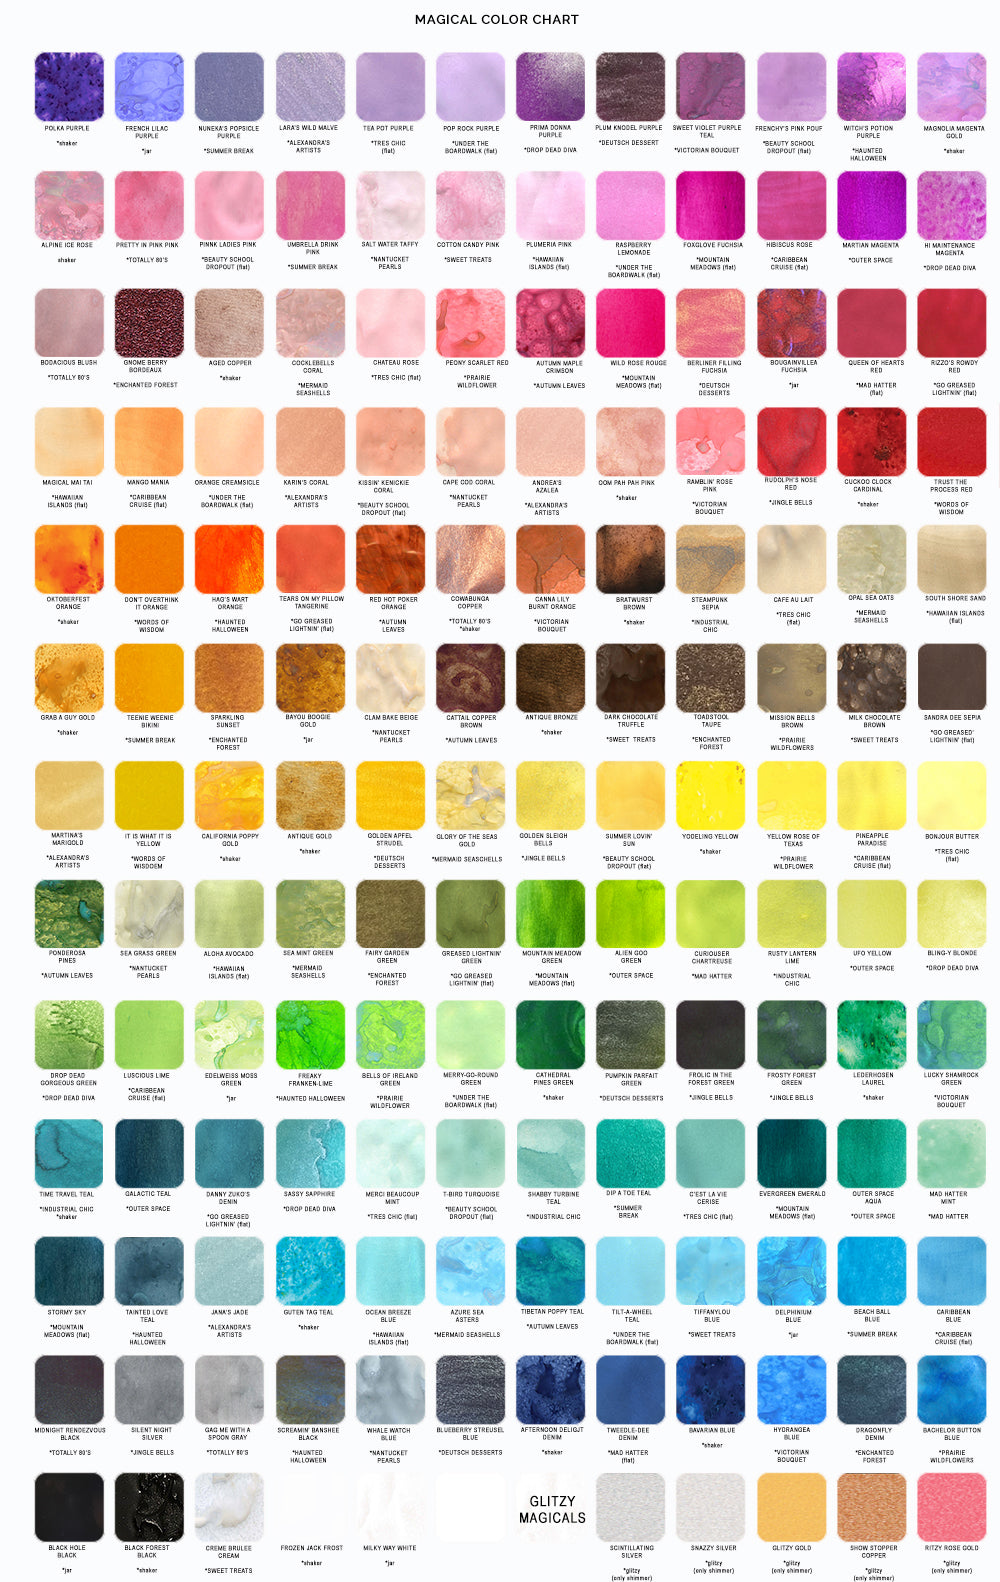 MAGICAL COLOR CHART – Lindy's Gang Store